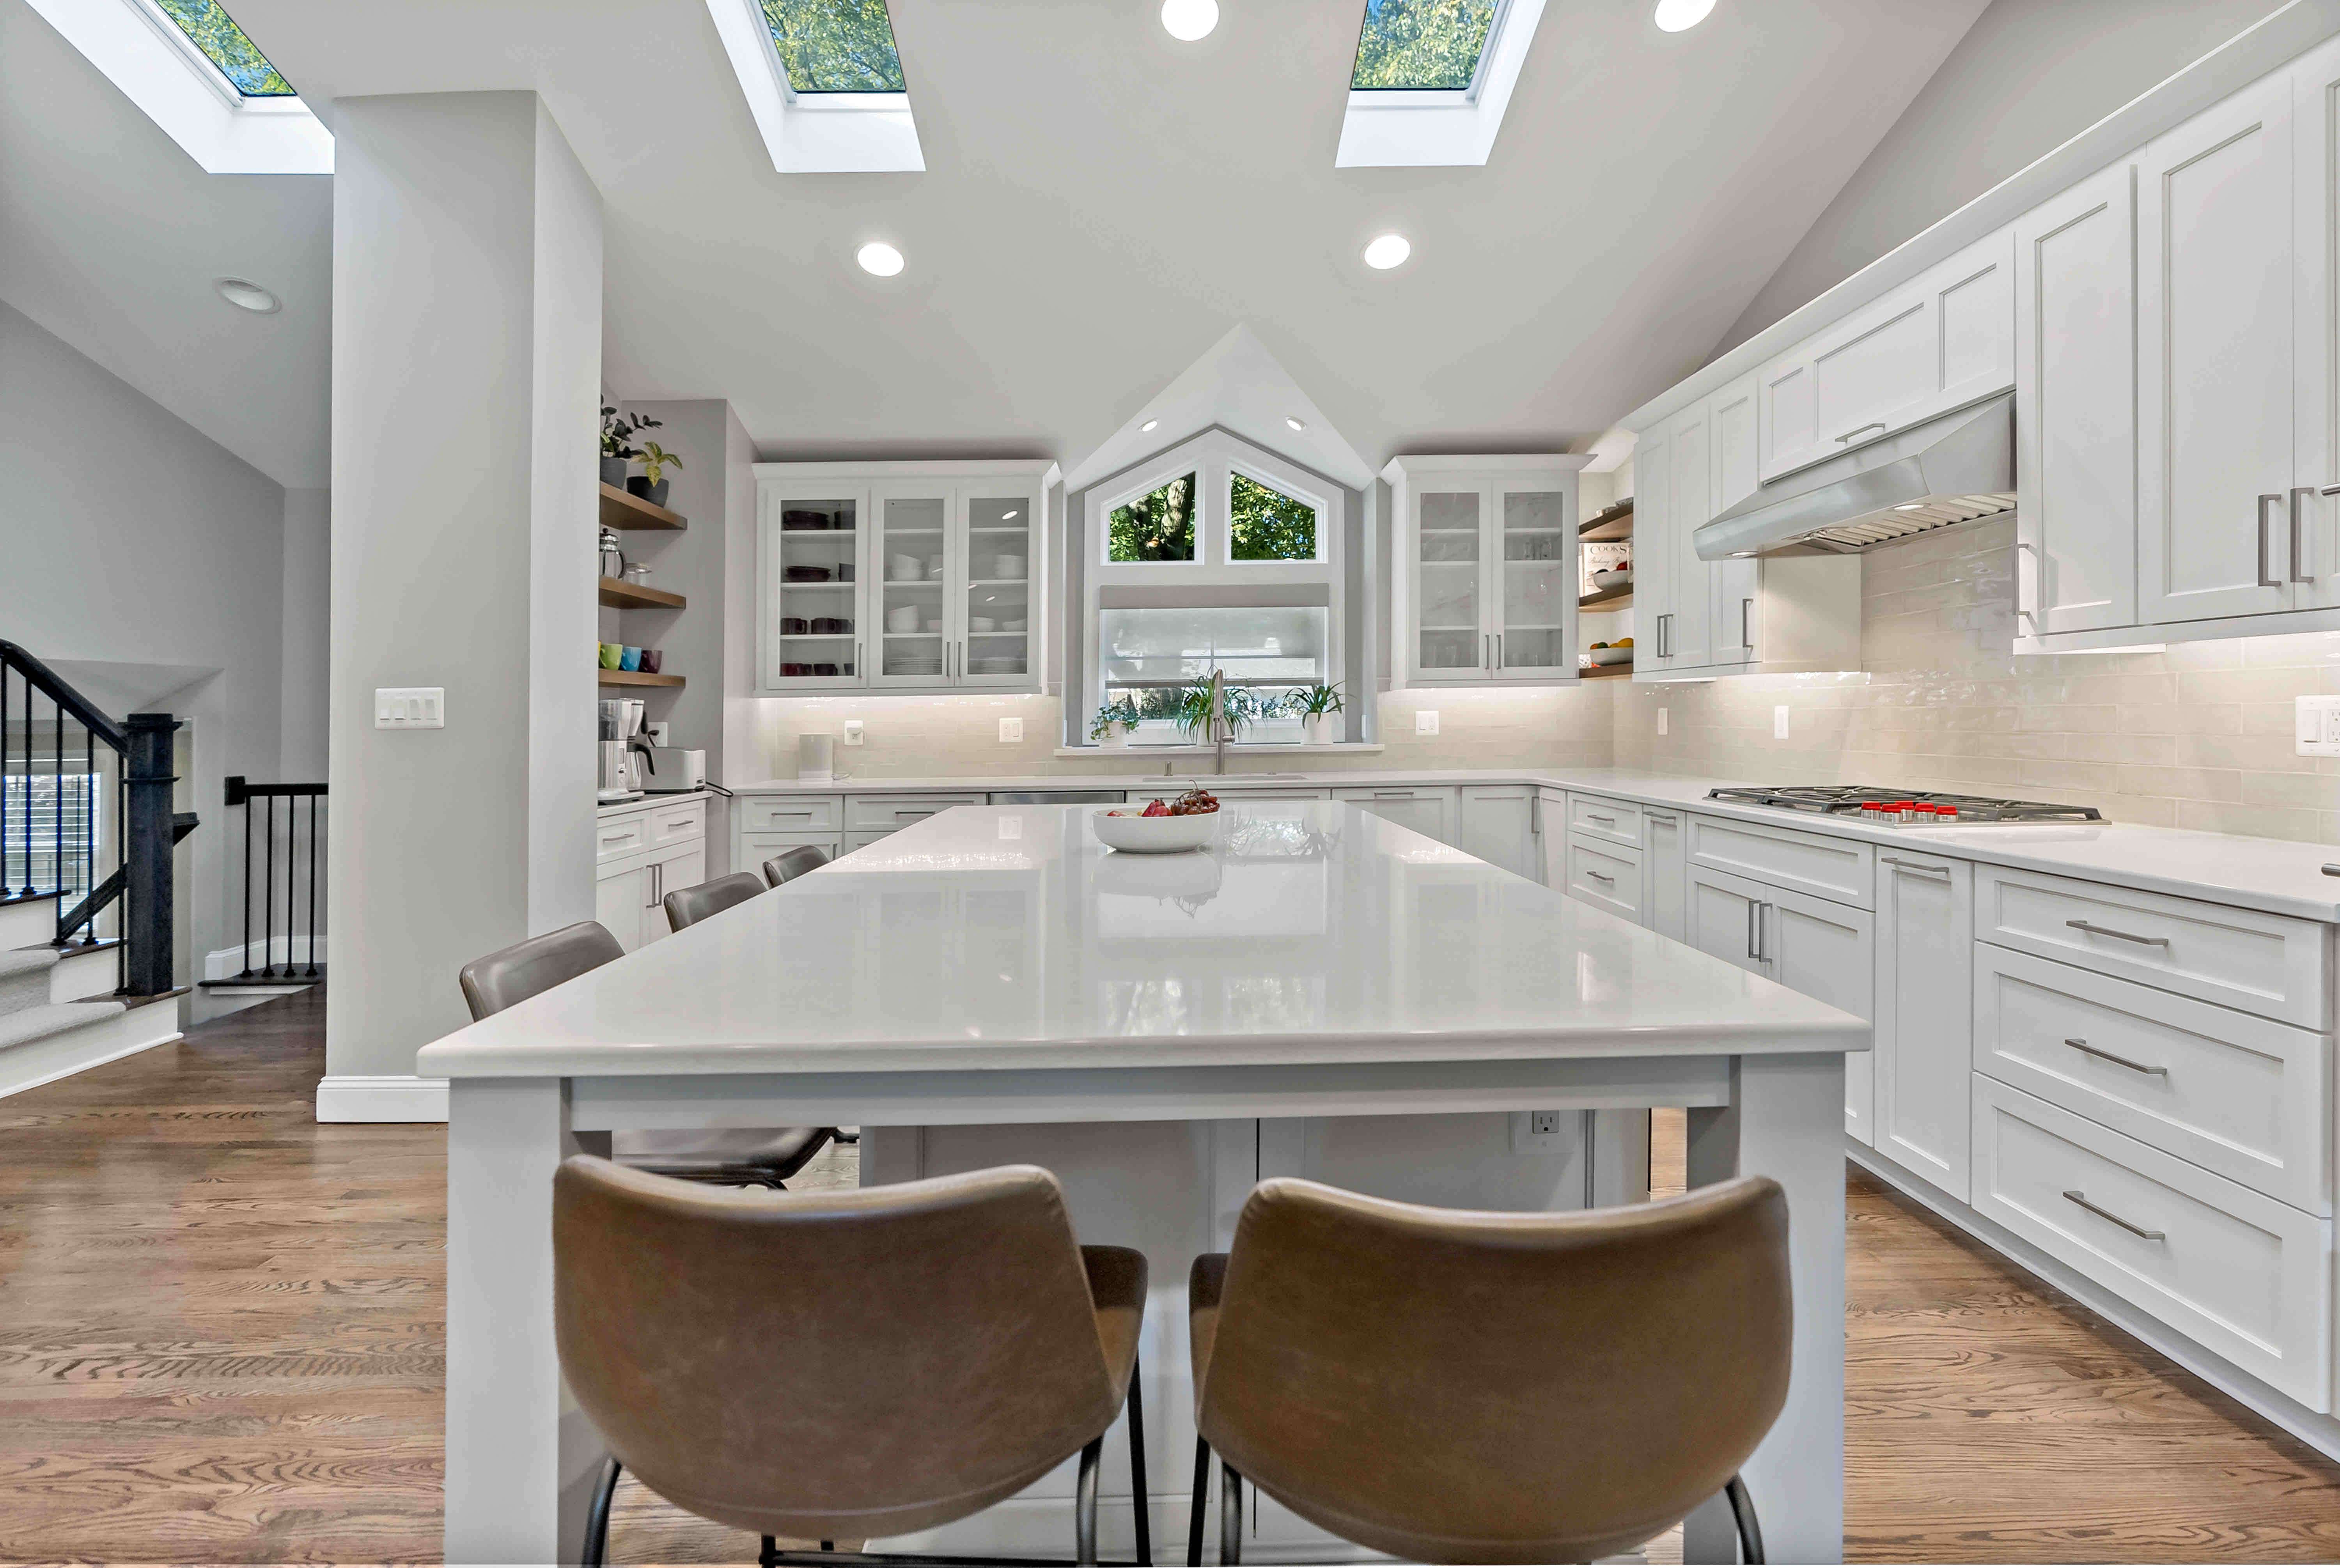 Large island seating and white cabinetry in kitchen